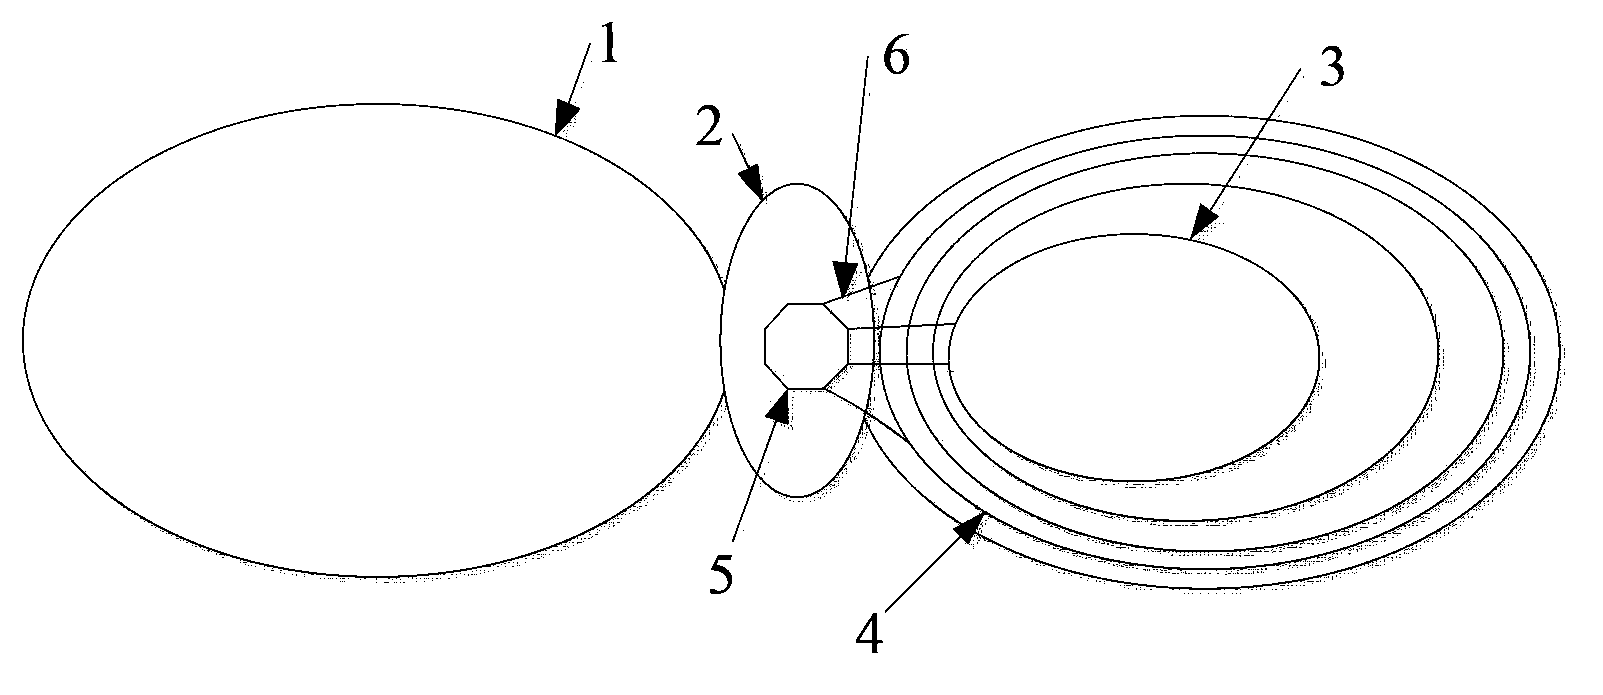 Flapping wing flight device with adjustable flapping wing